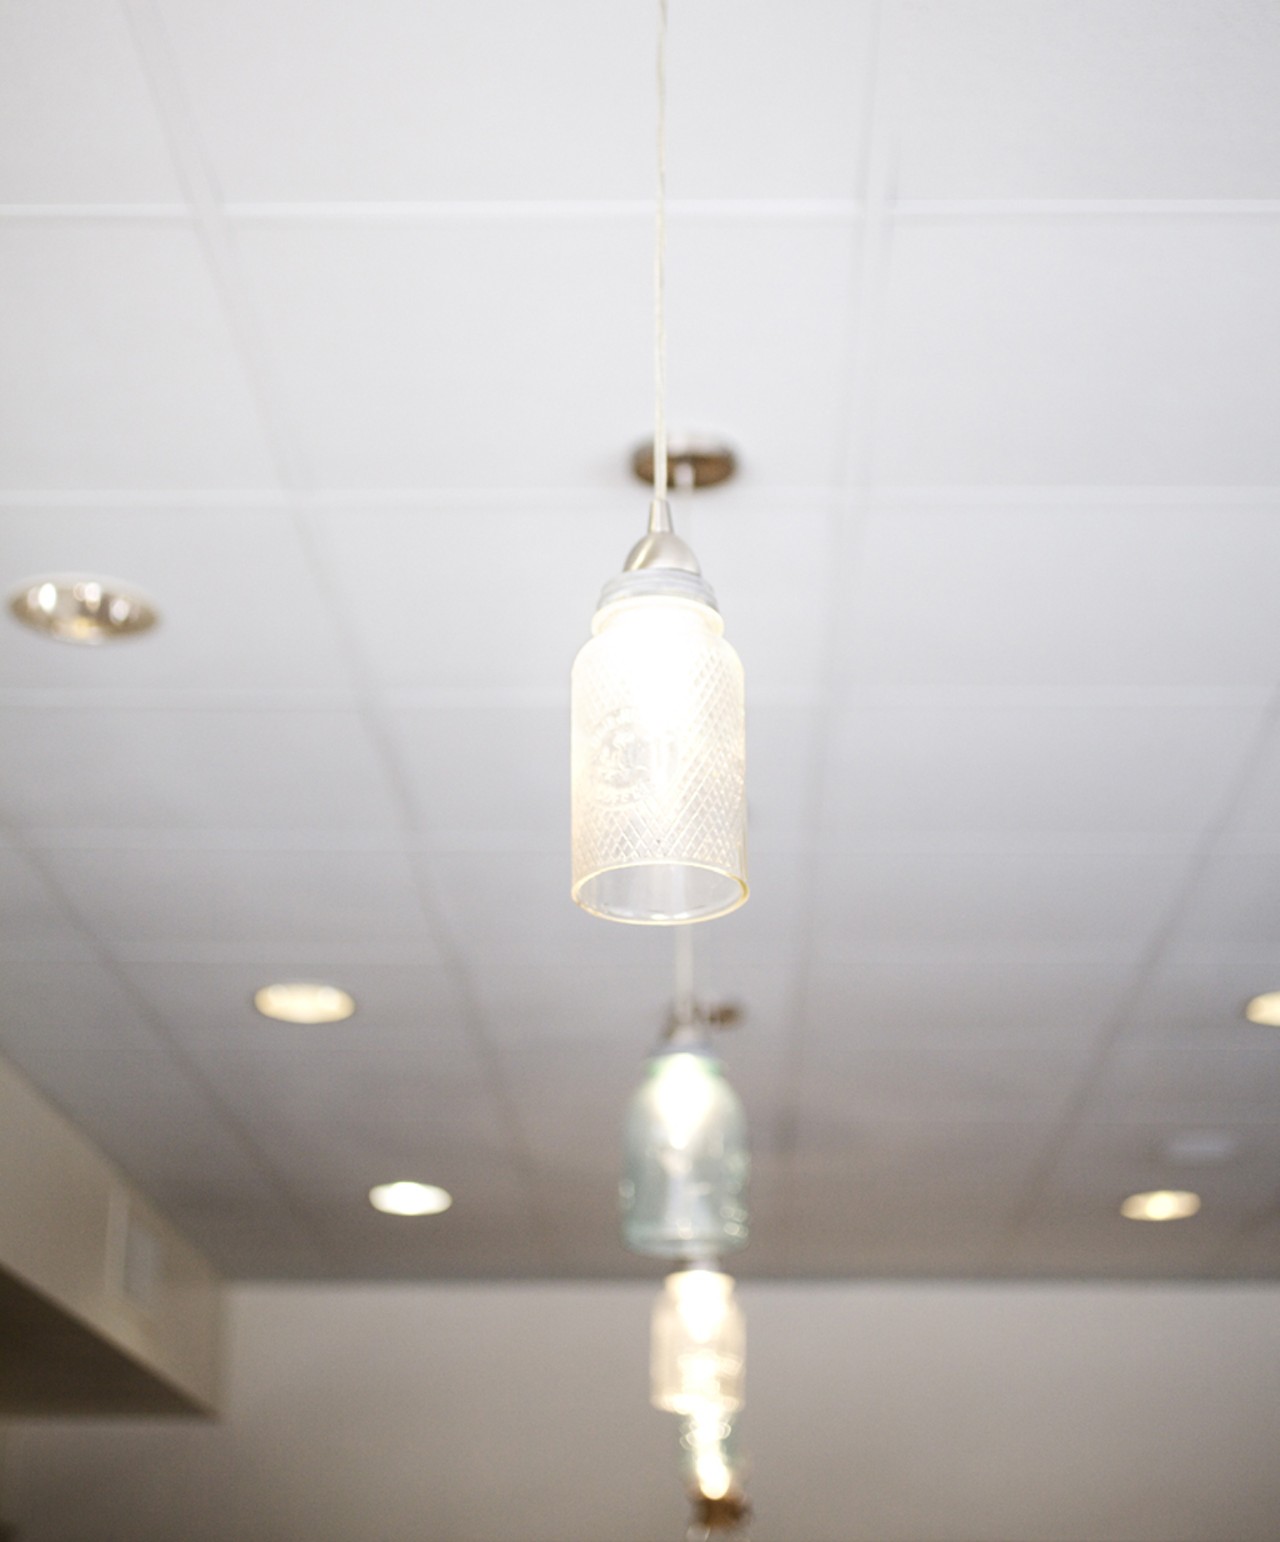 The pendants that hang above the bar are crafted with glass jars.